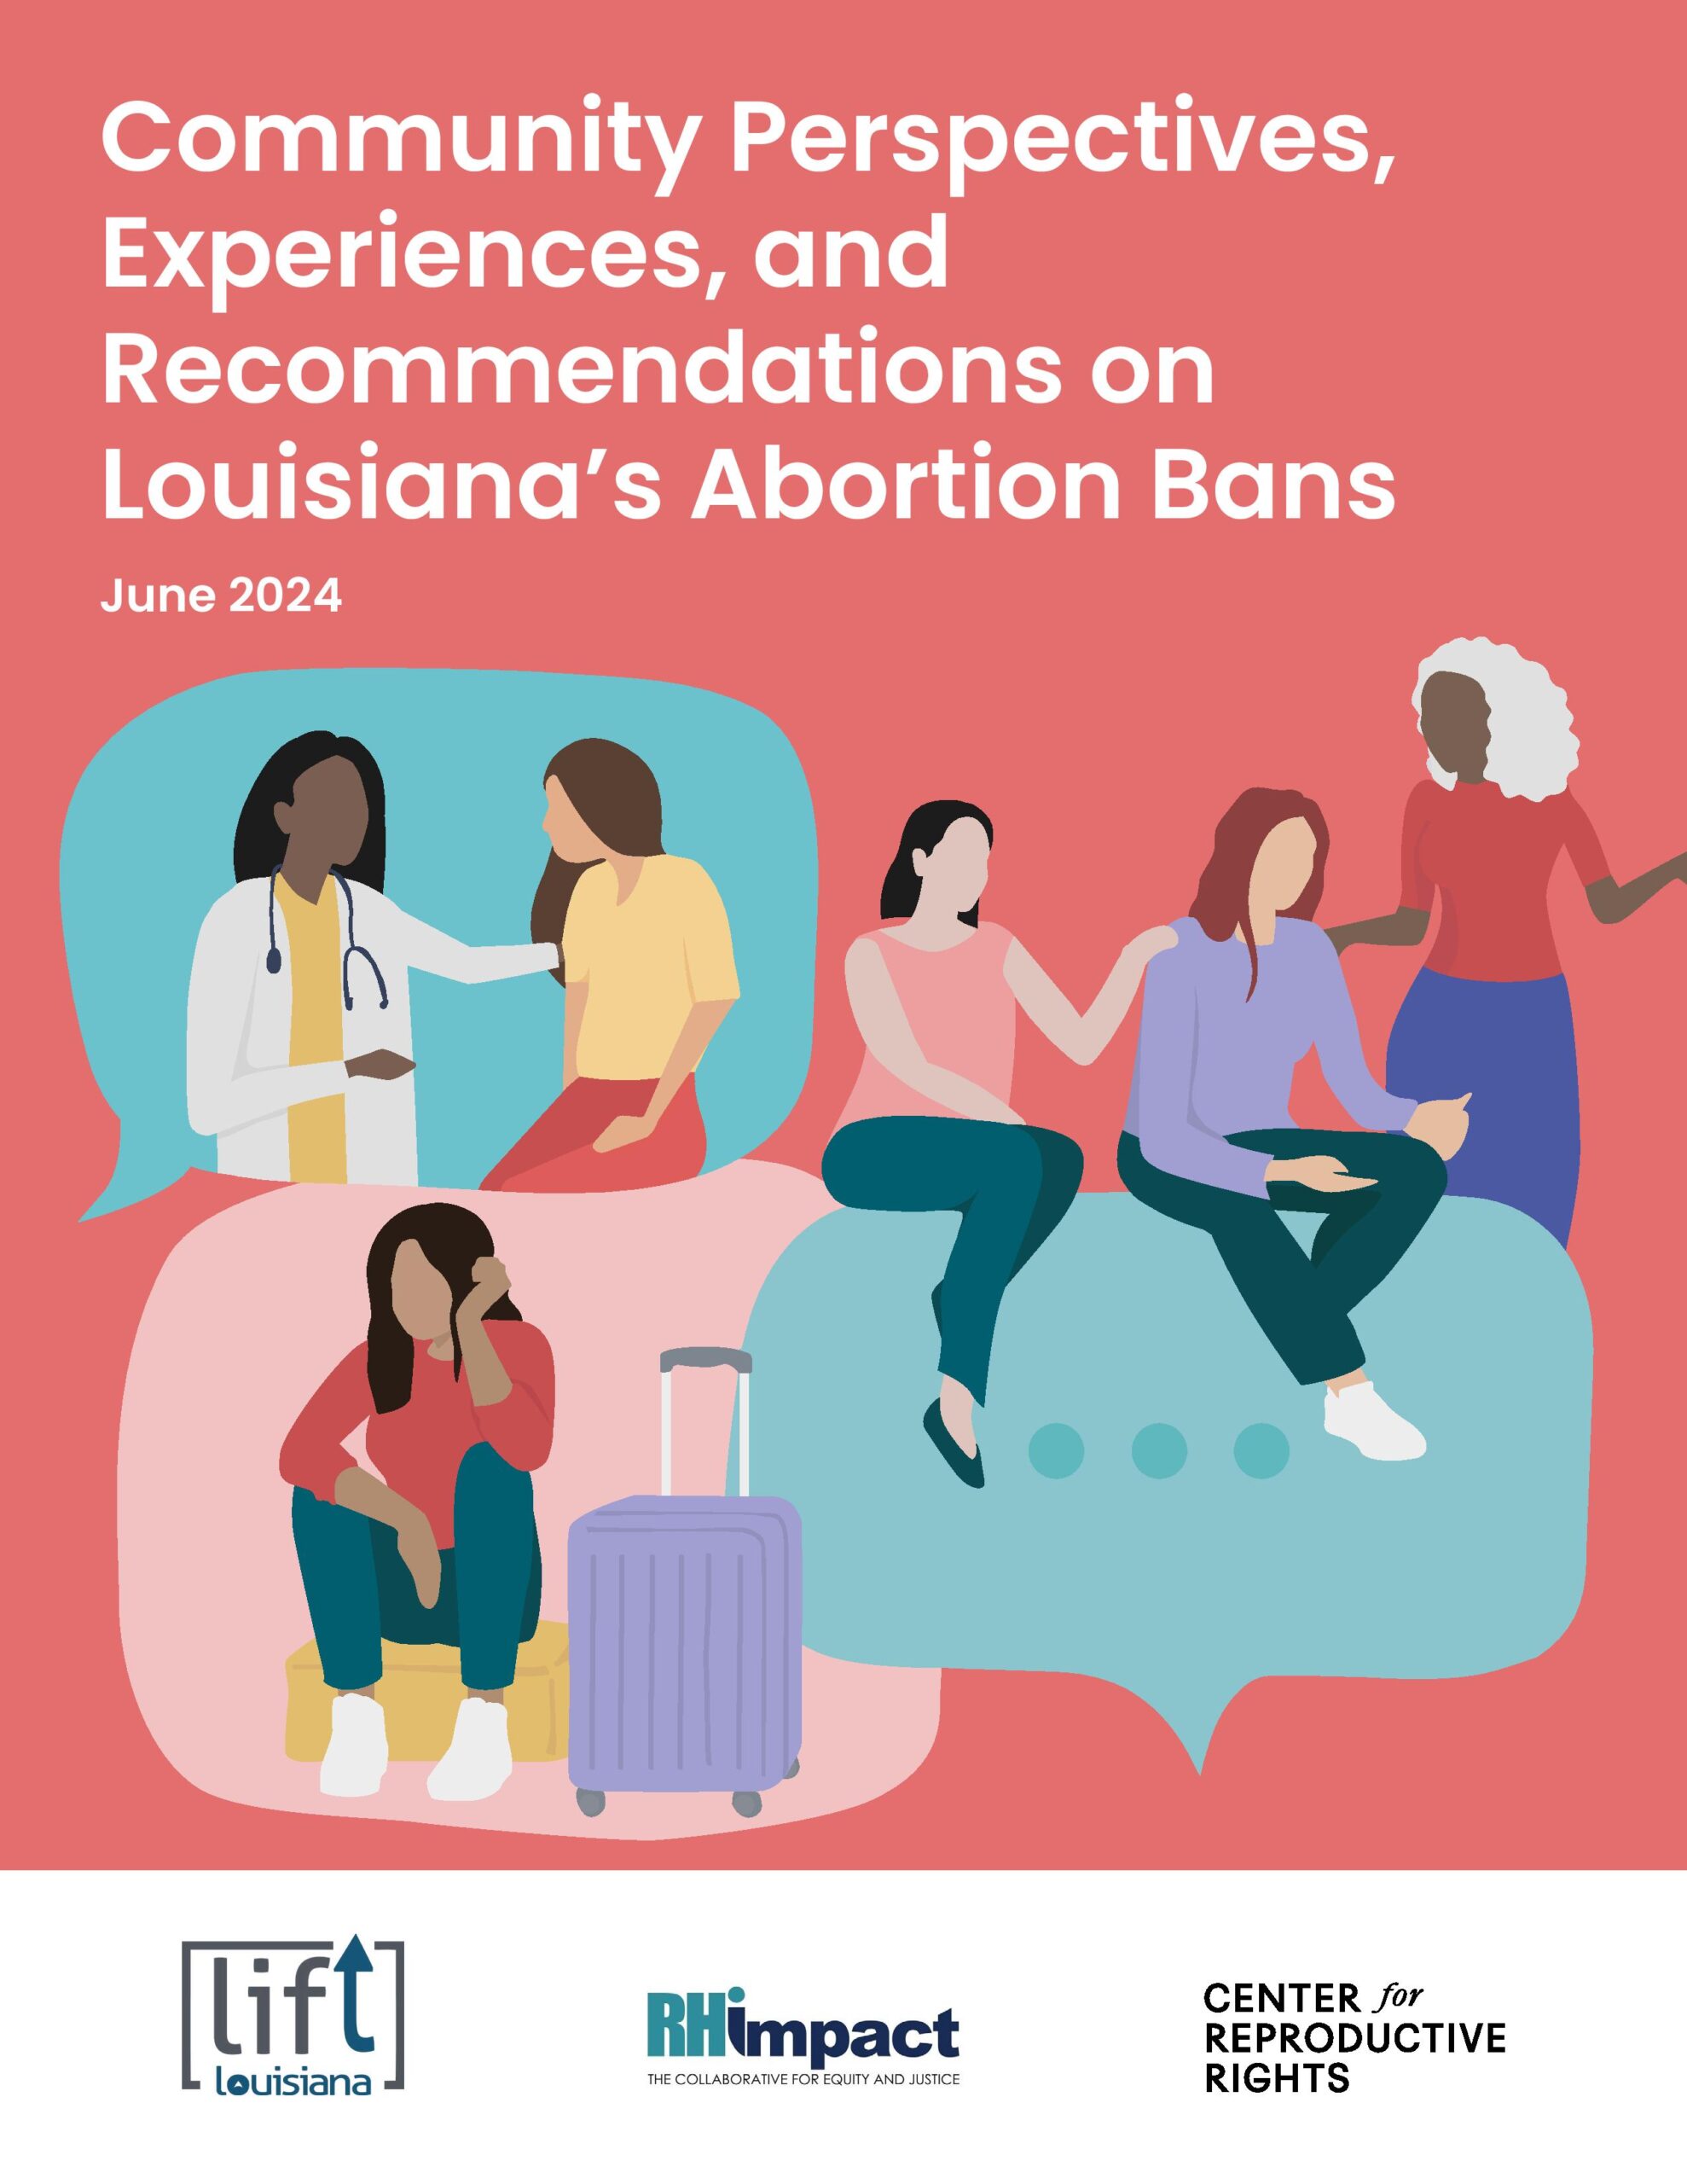 Community Perspectives, Experiences, and Recommendations on Louisiana's Abortion Bans